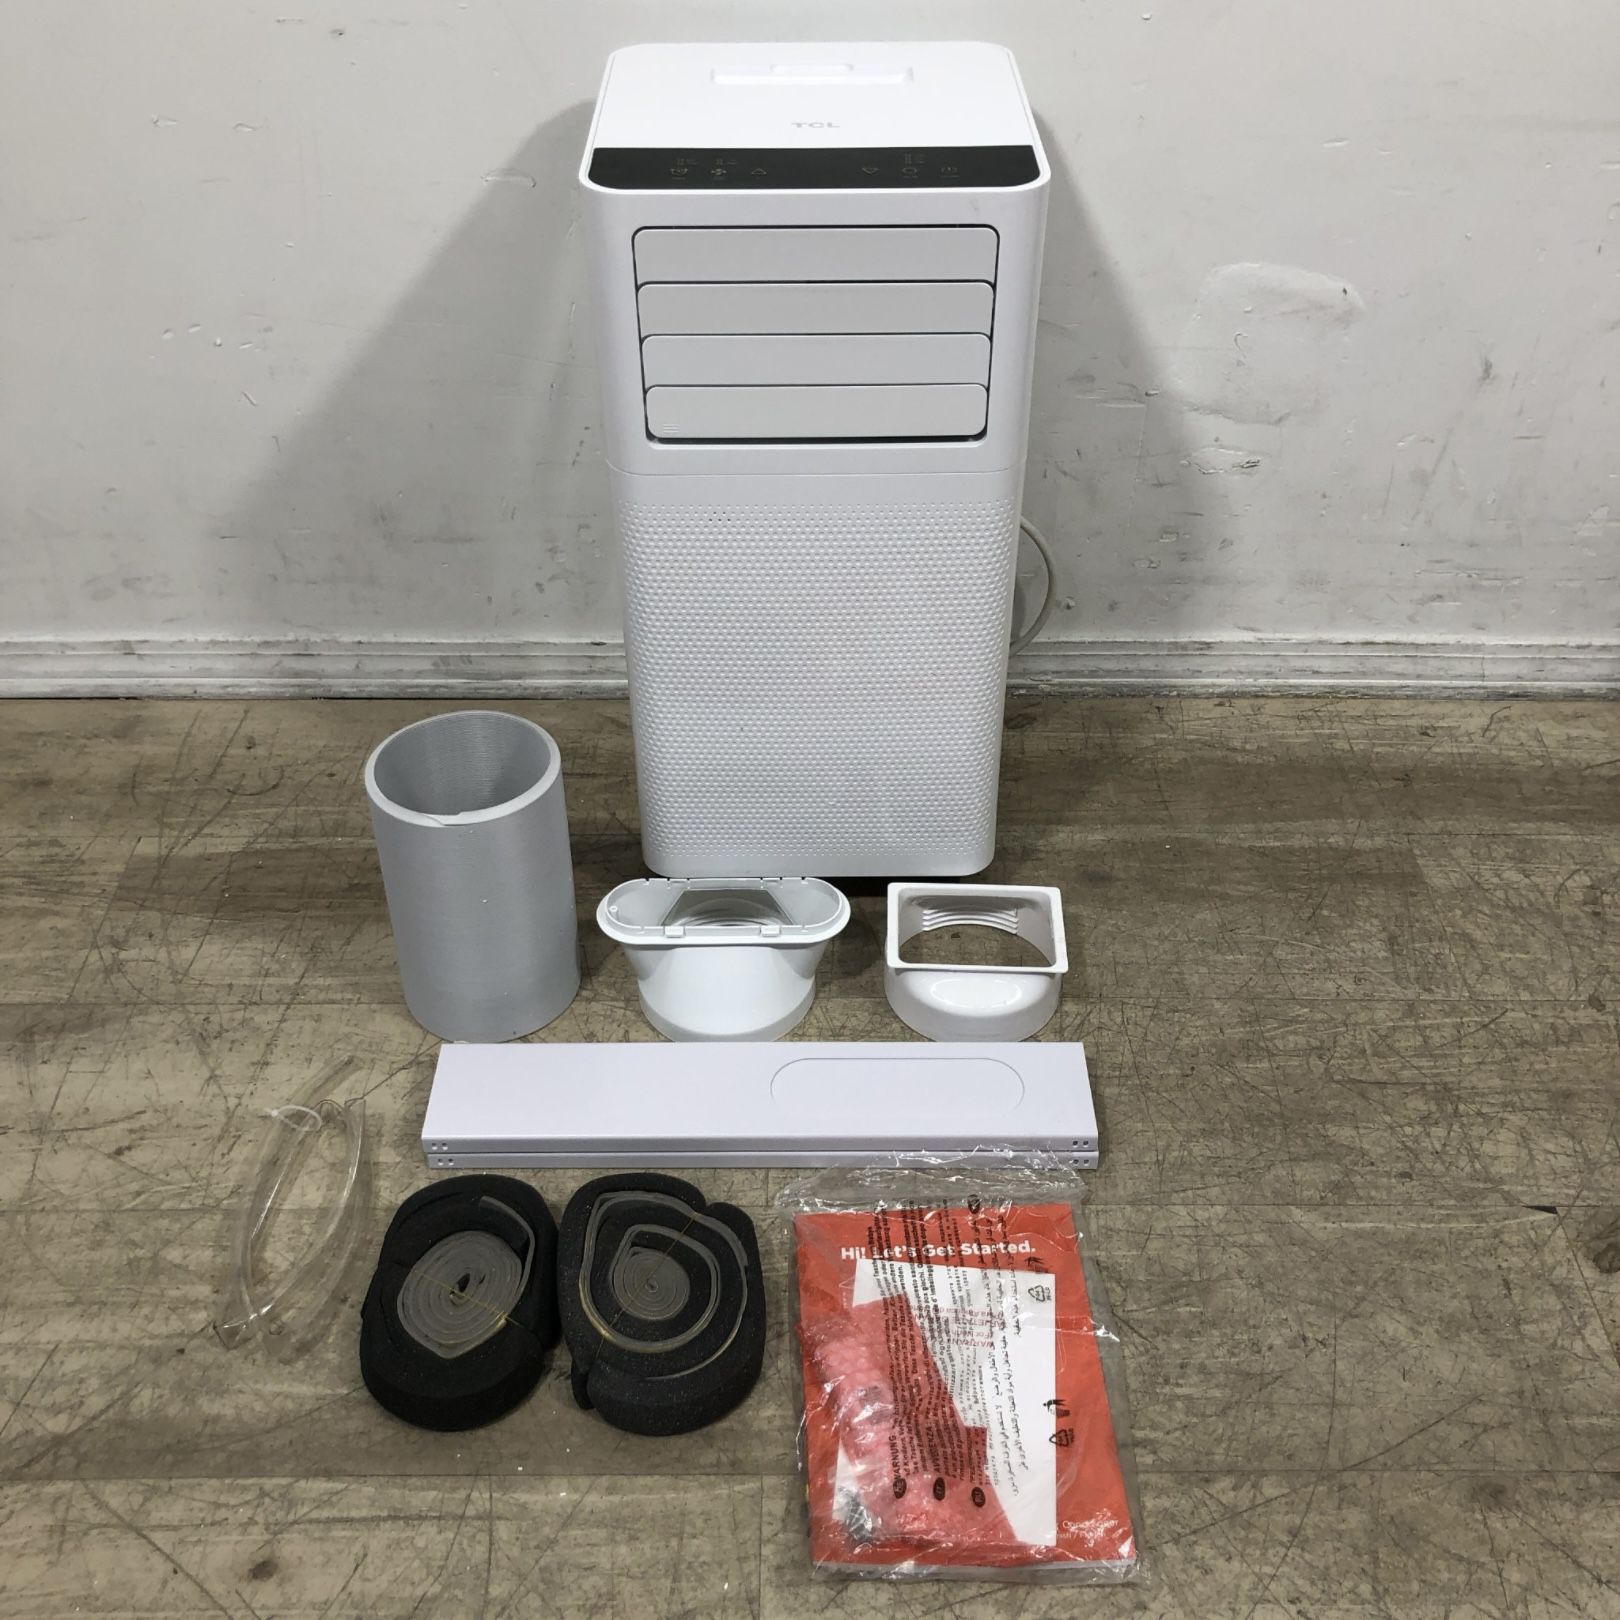 TCL 5K Portable Air Conditioner